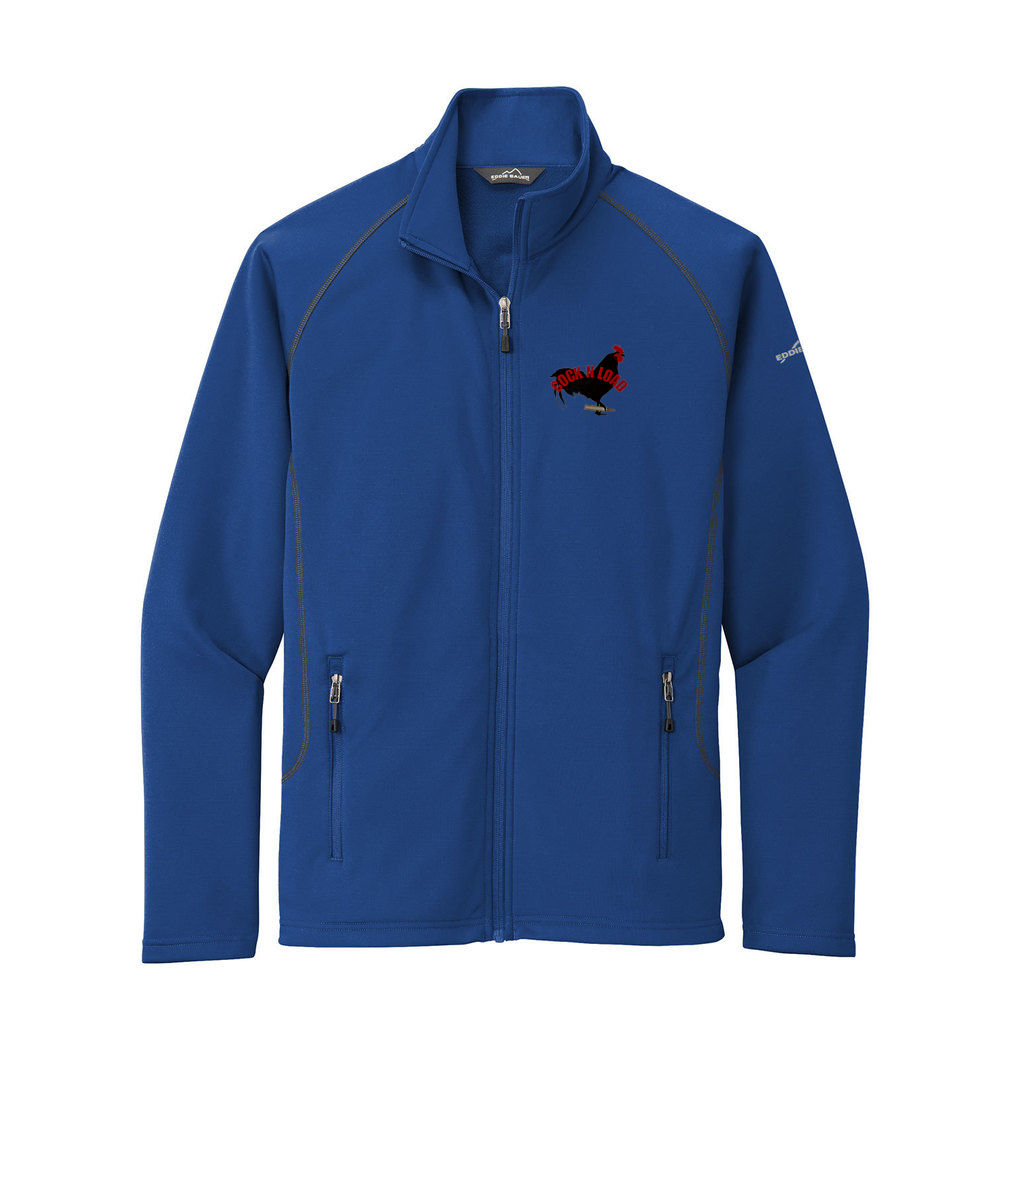 Cock n load 2Embroidered Eddie Bauer® Smooth Fleece Base Layer Full-Zip or Similar